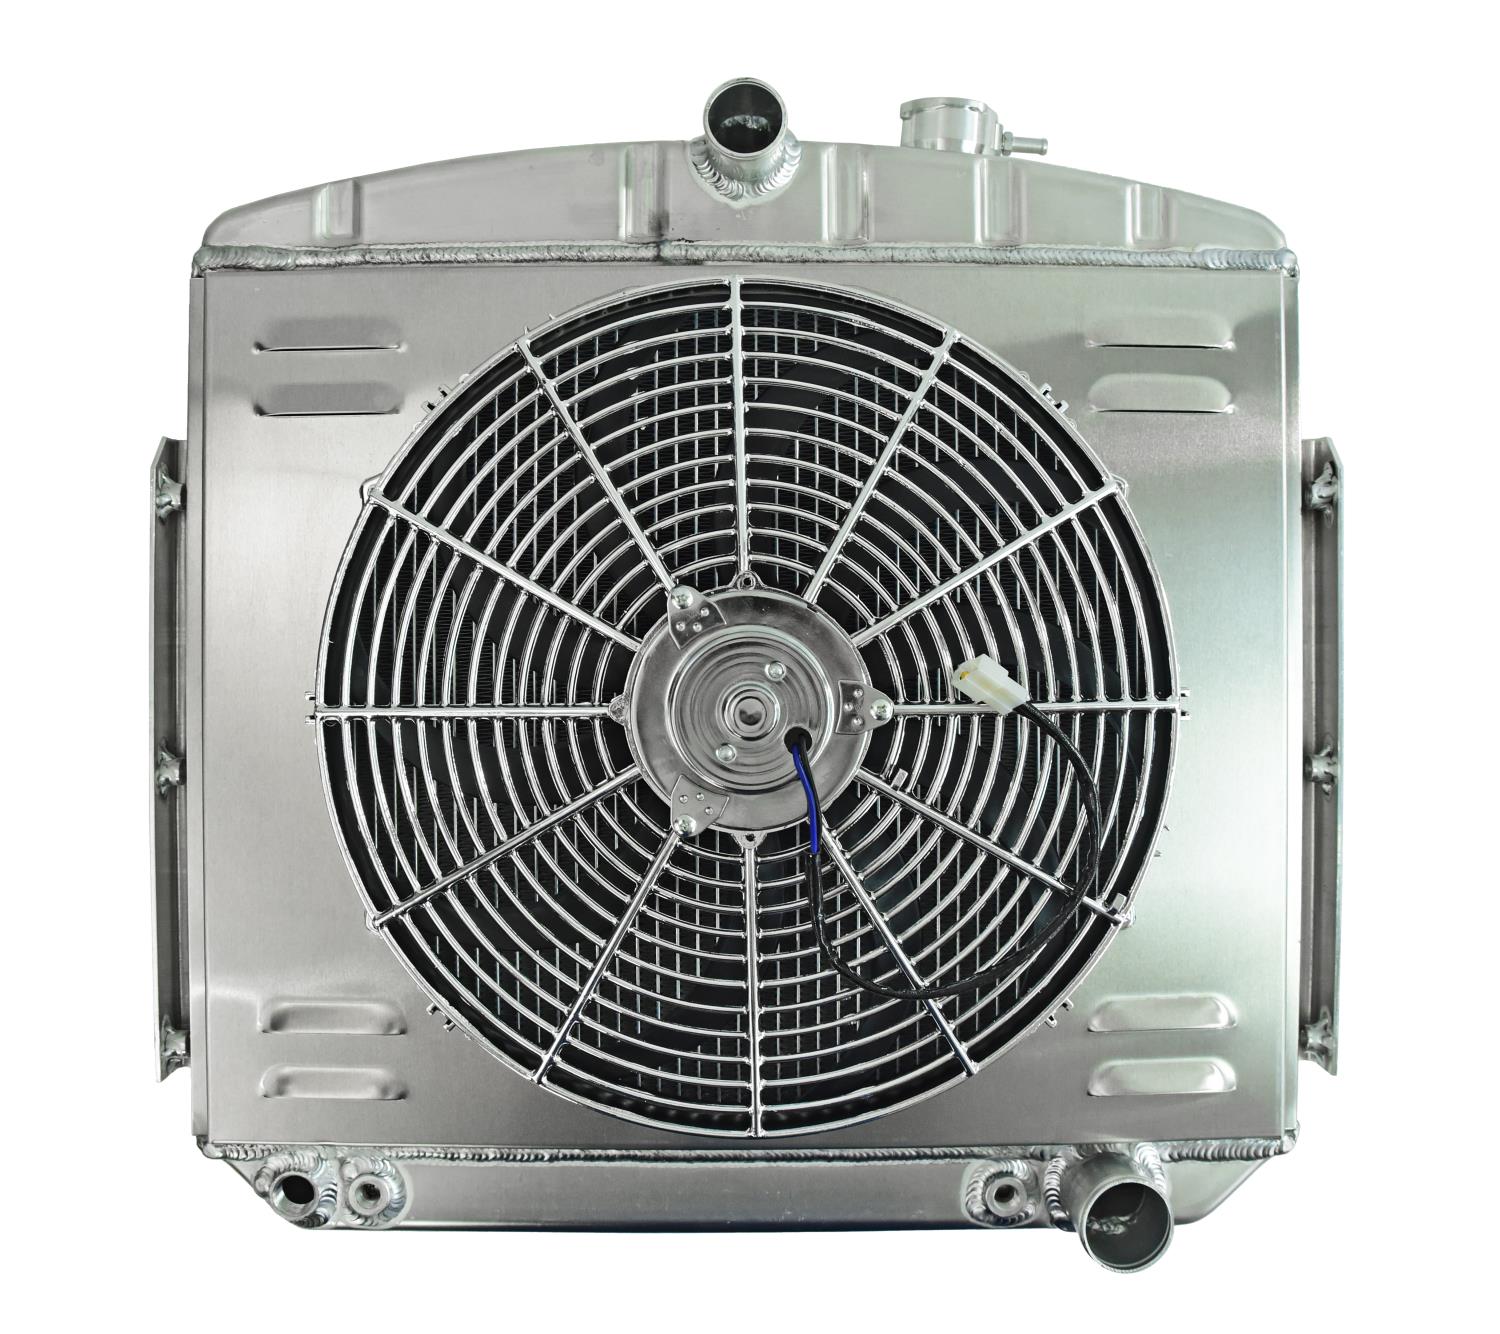 Aluminum Radiator & Fan Combo for 1955-1956 Chevrolet with V8 or 6 Cylinder Engine [16 in. Fan]